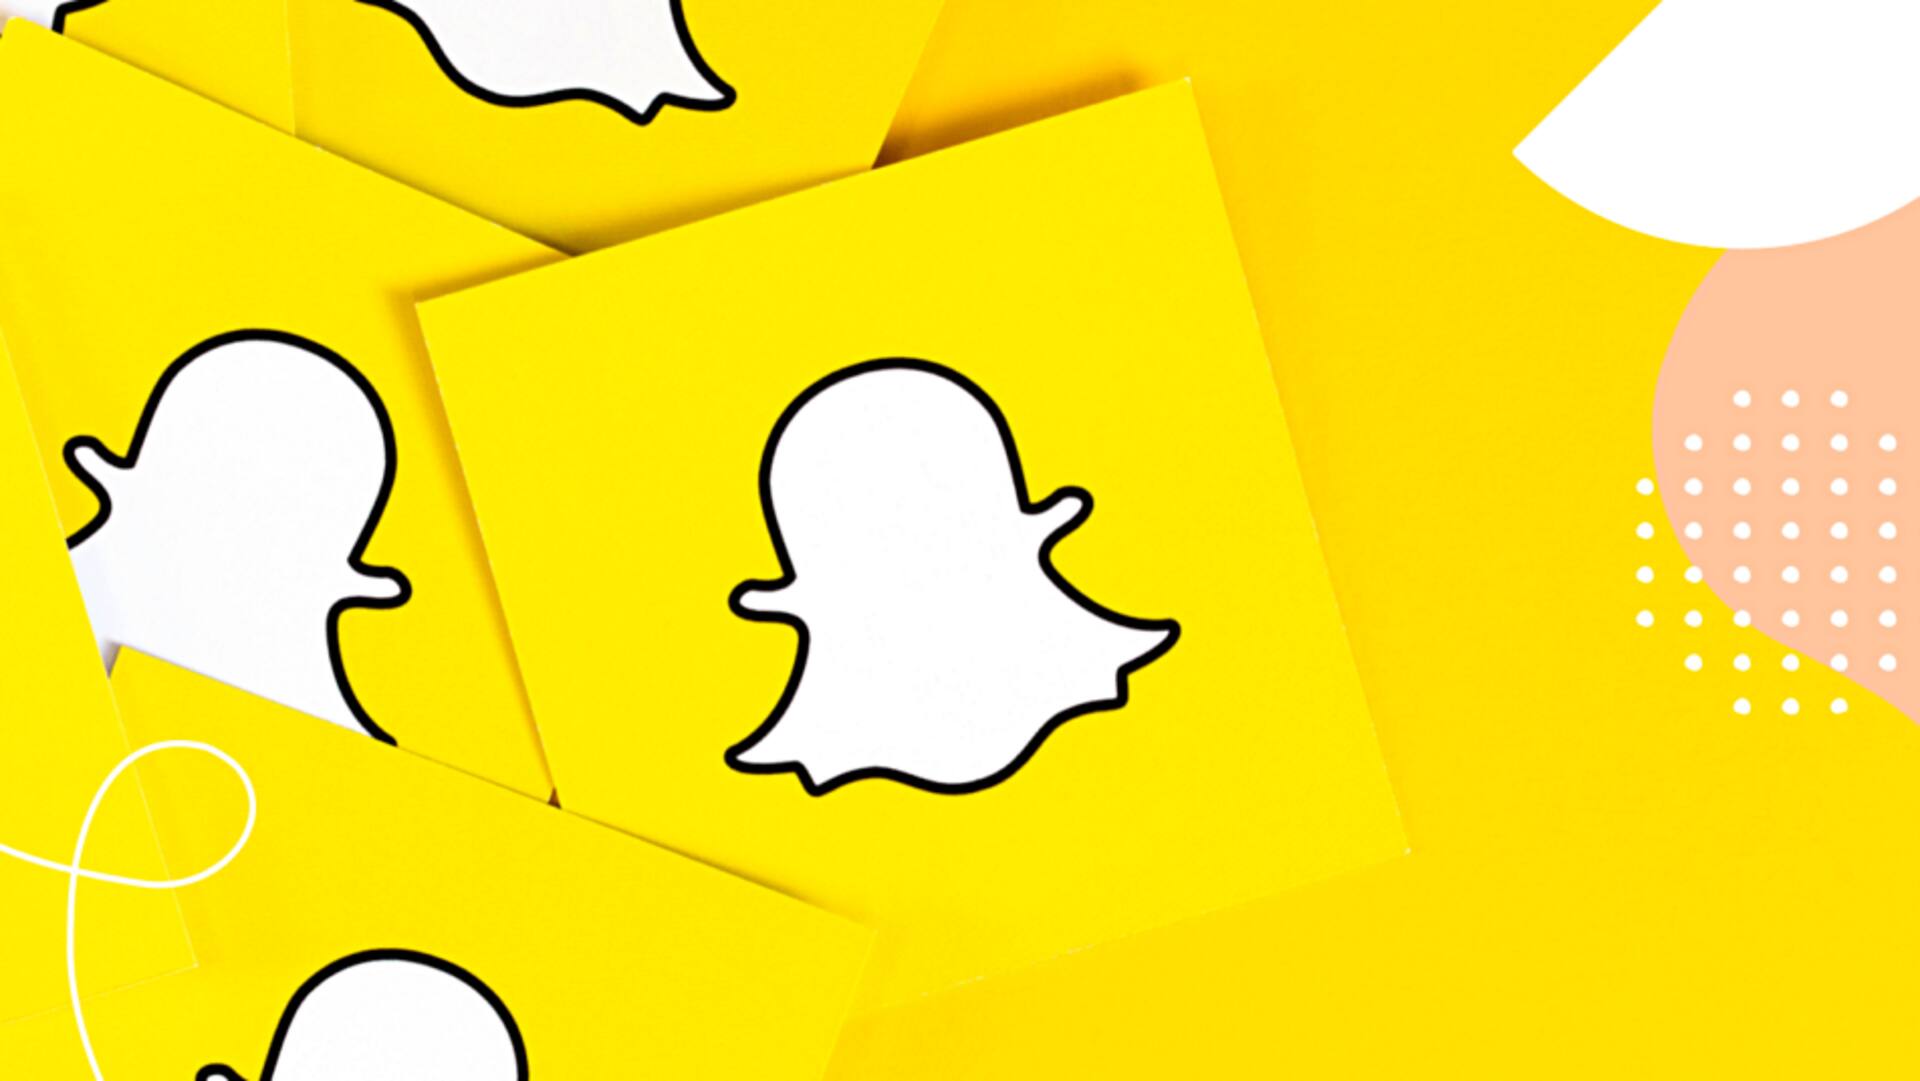 Snapchat aims to attract Indian Gen Z with tailored experiences